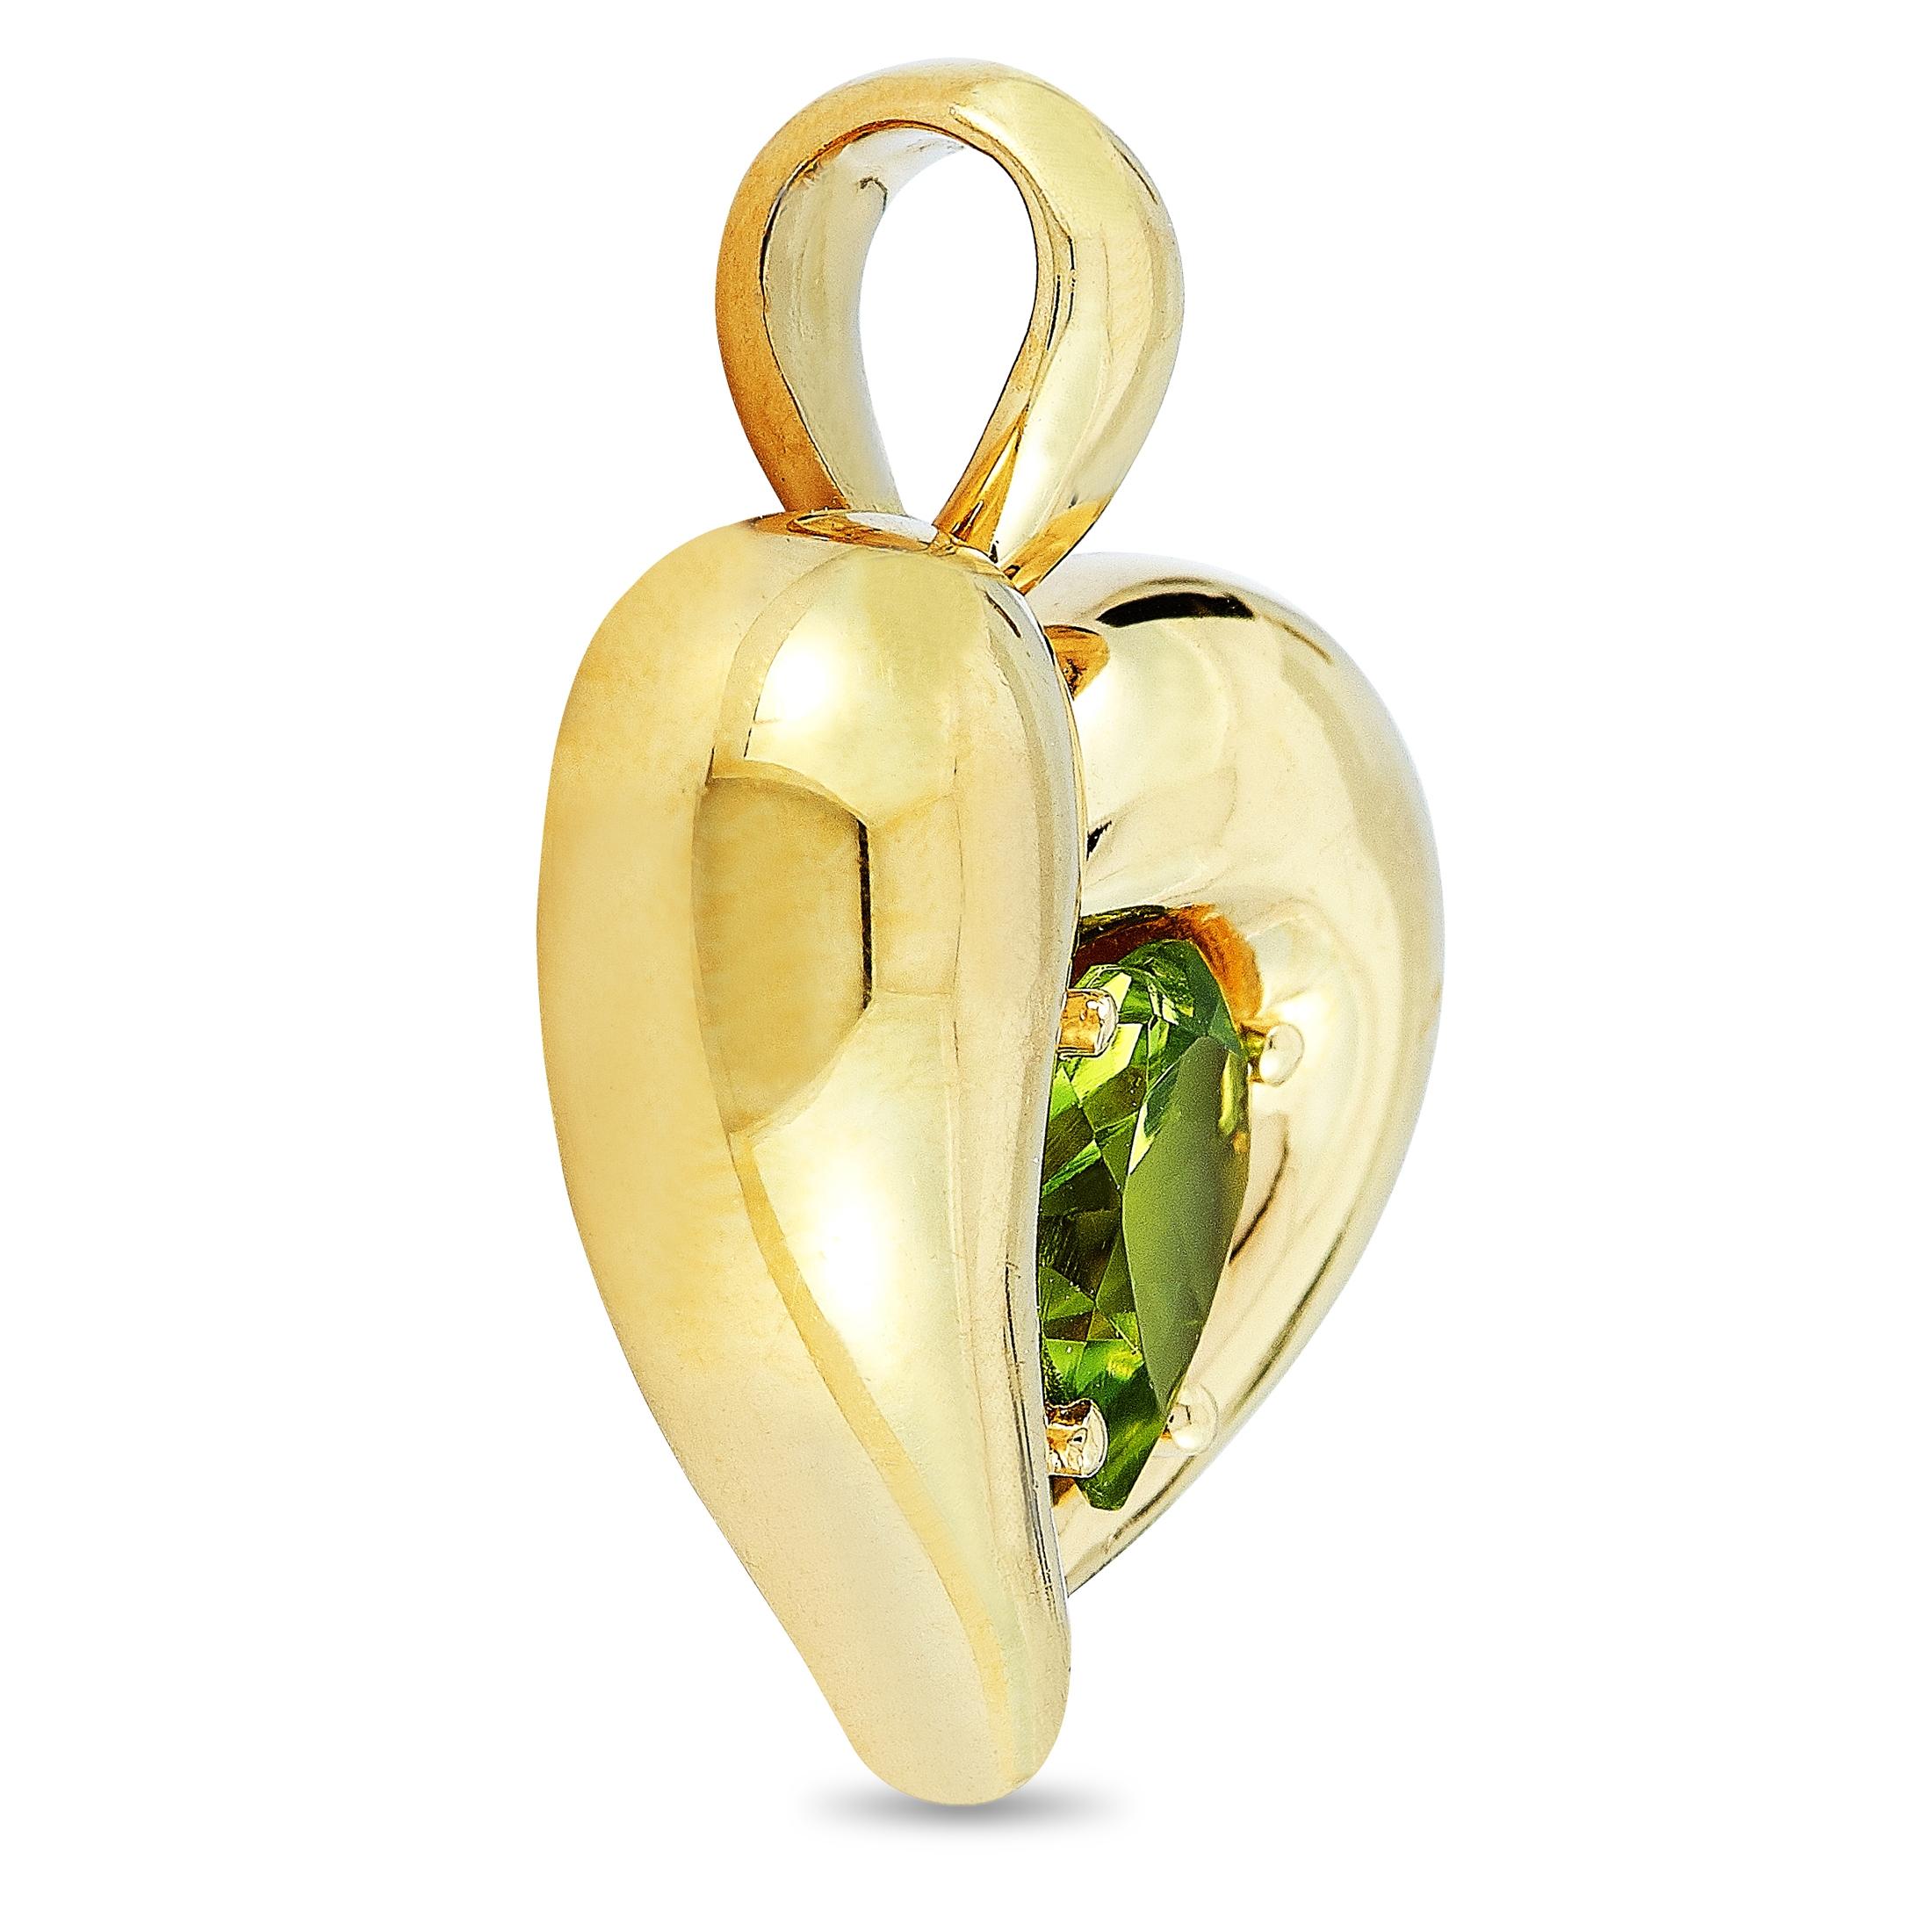 This vintage Van Cleef & Arpels heart pendant is made of 18K yellow gold and embellished with a peridot. The pendant weighs 10.2 grams and measures 0.90” in length and 0.87” in width.

Offered in estate condition, this item includes the